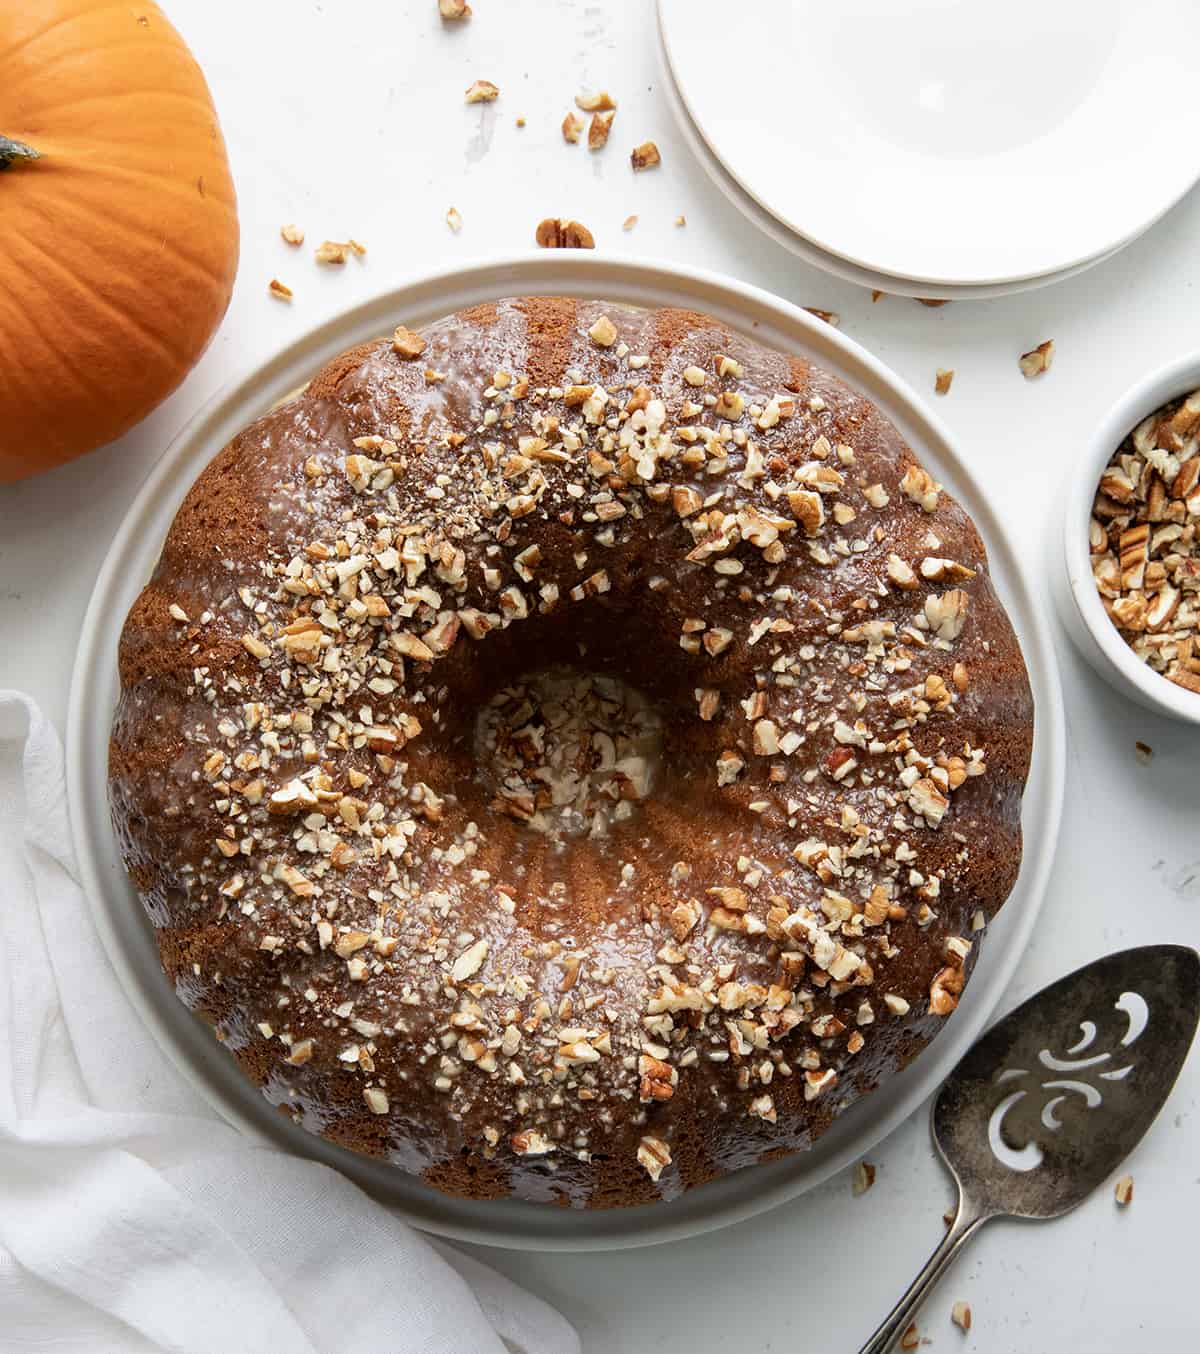 Overhead of a Pumpkin Spice Bundt Cake on a White Table.